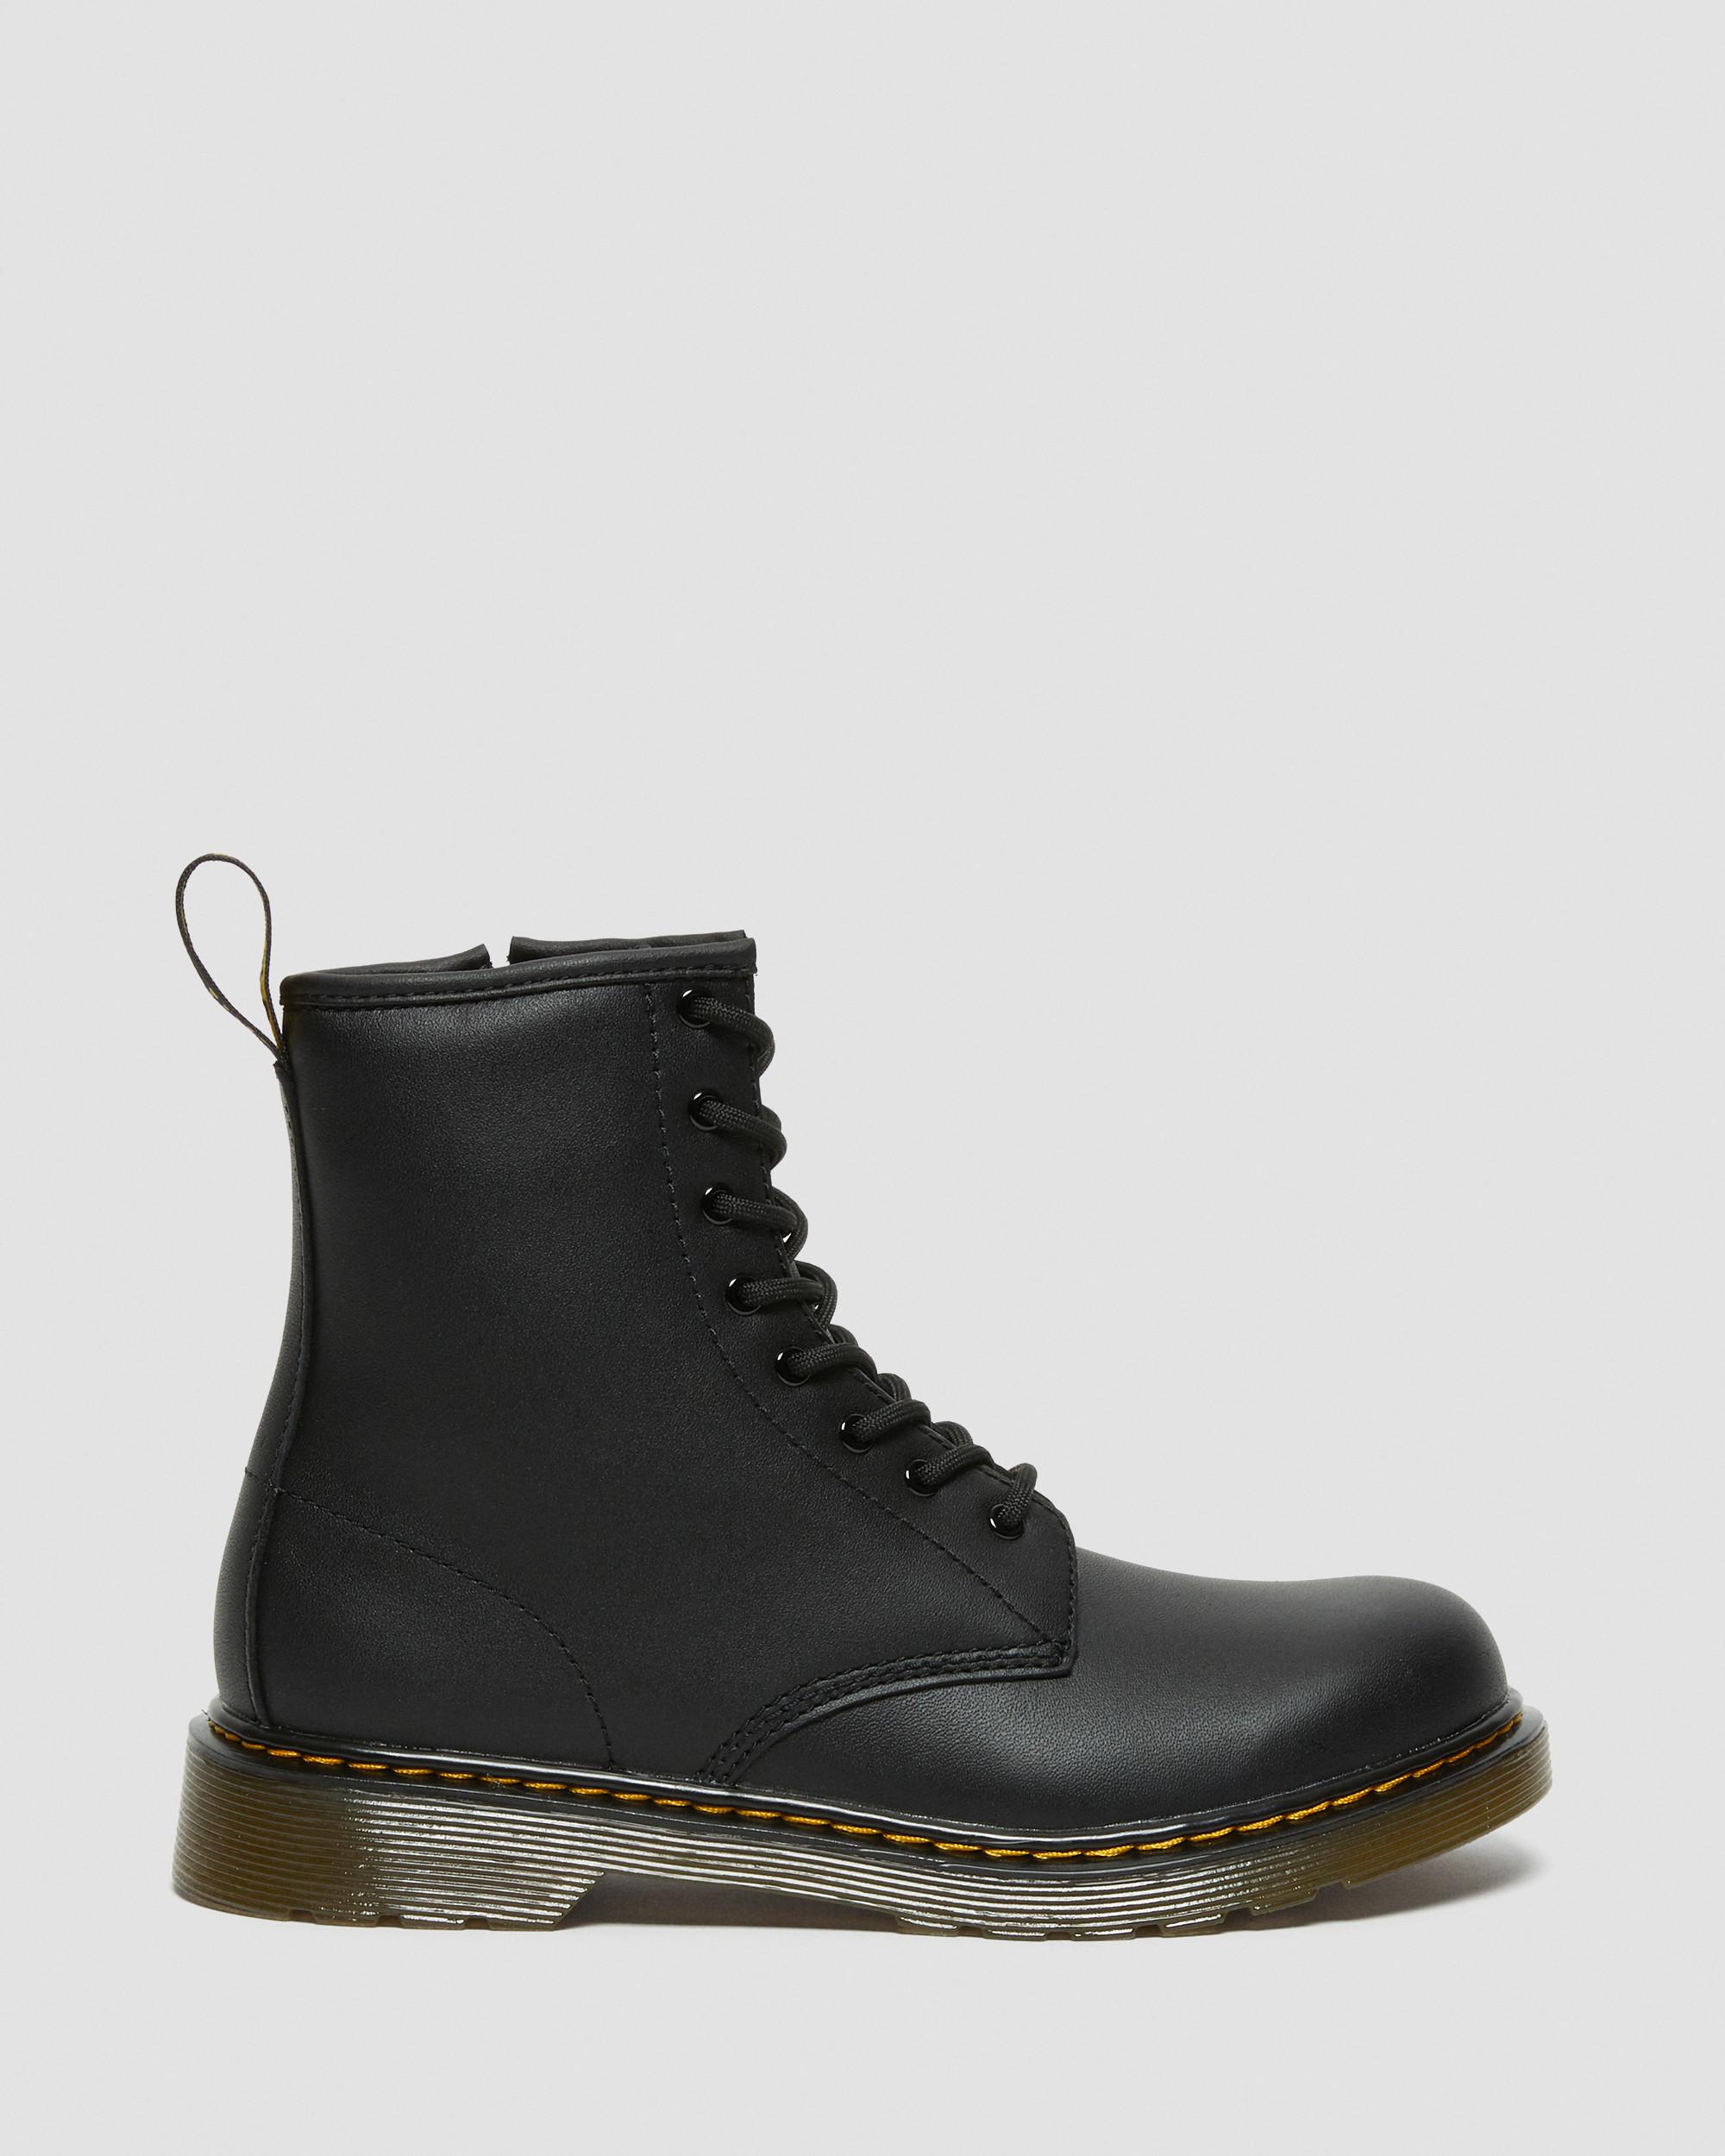 Dr. Martens Women's 1460 W Softy T Fashion Boot